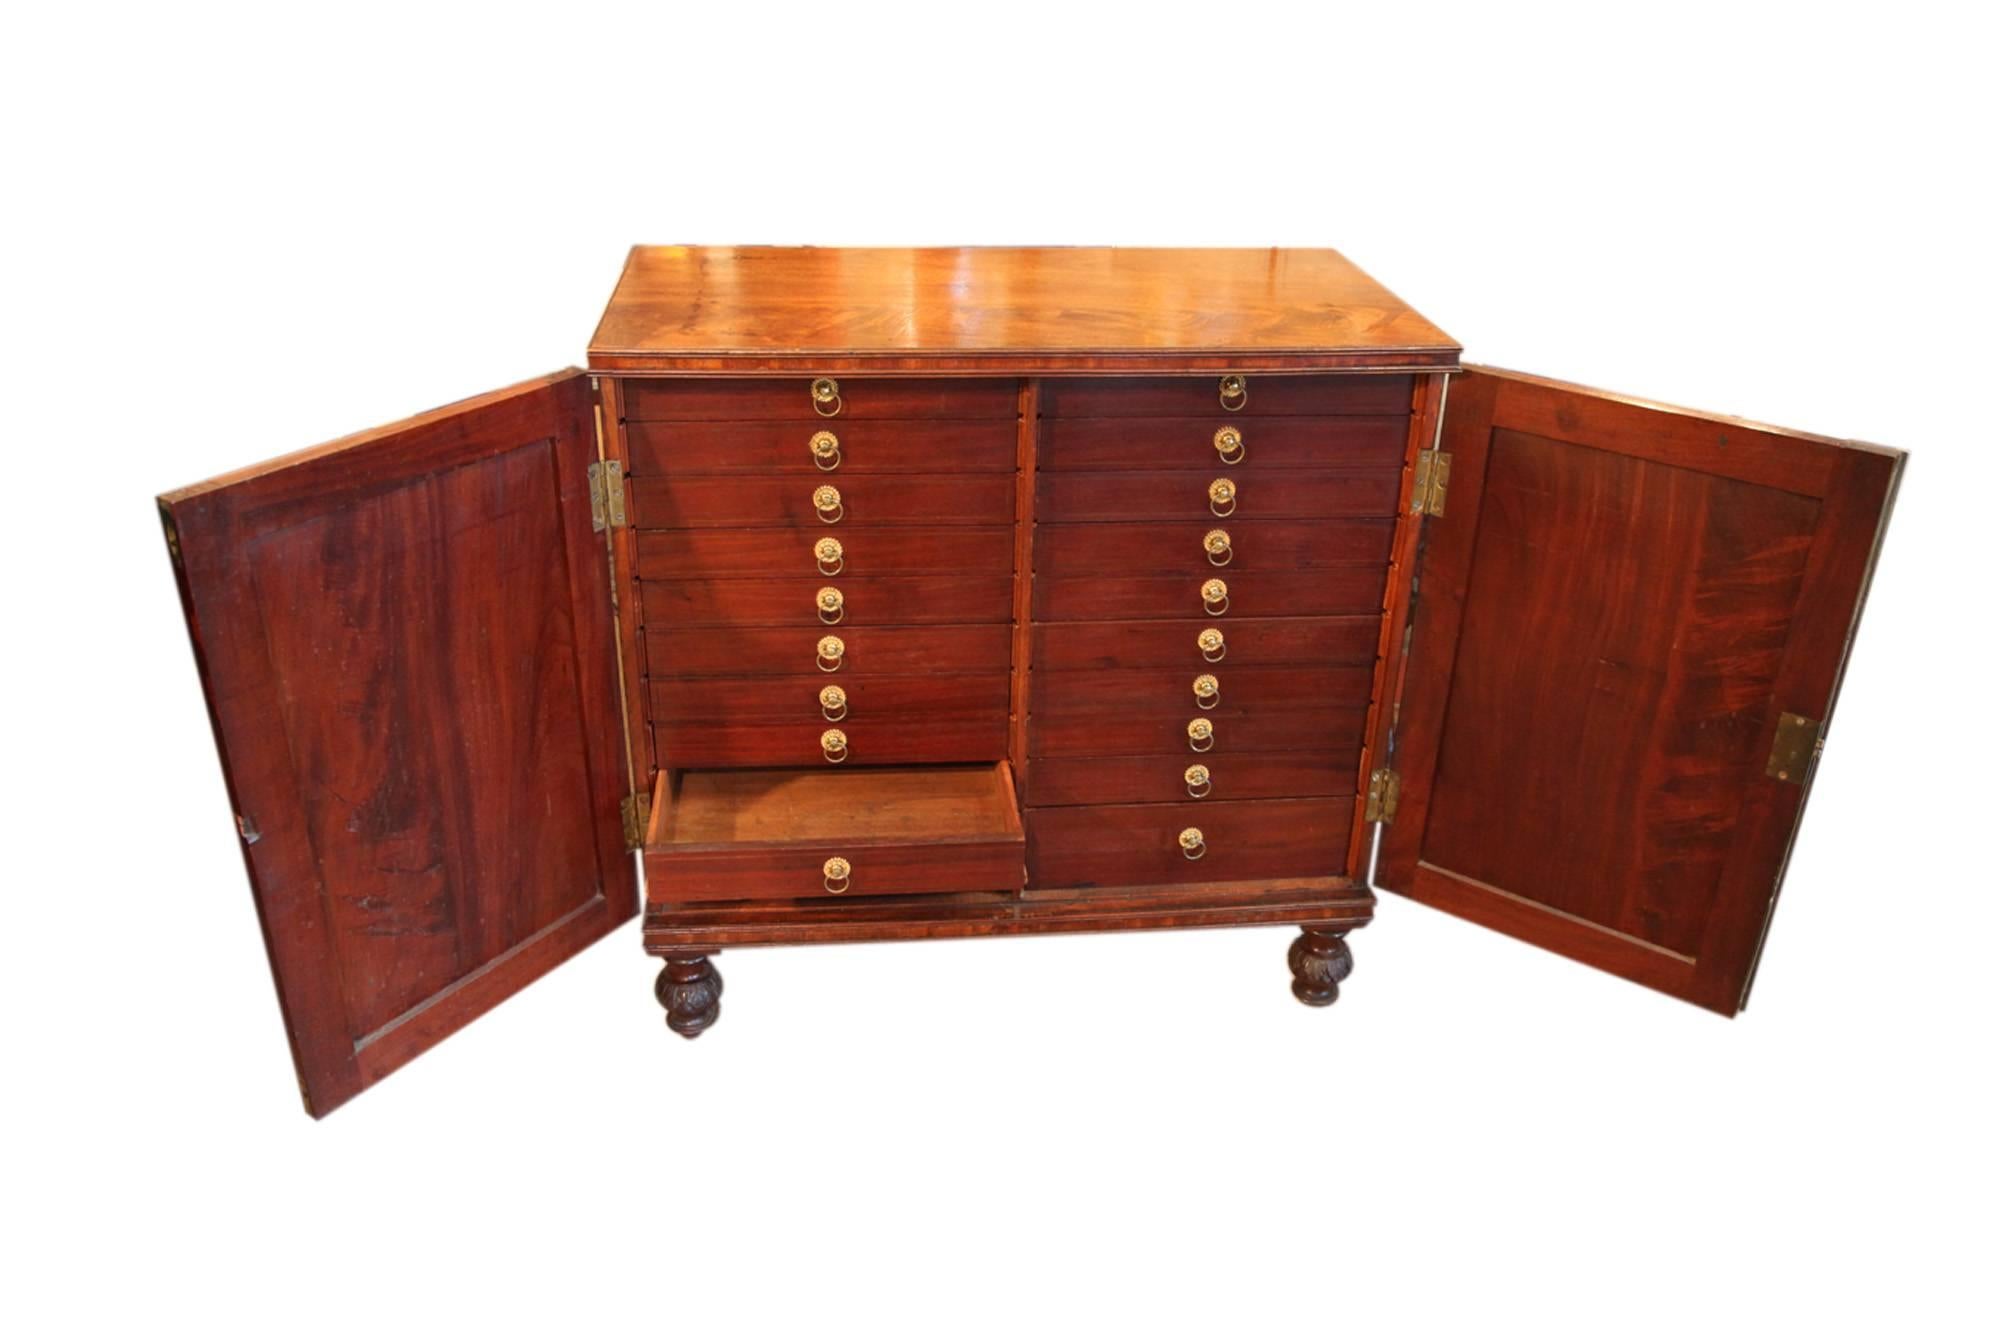 Late 19th Century mahogany collectors or specimen chest, circa 1880. The rectangular moulded top above twin cupboard doors, opening to reveal a series of ring pull drawers, raised on acanthus carved turned feet.